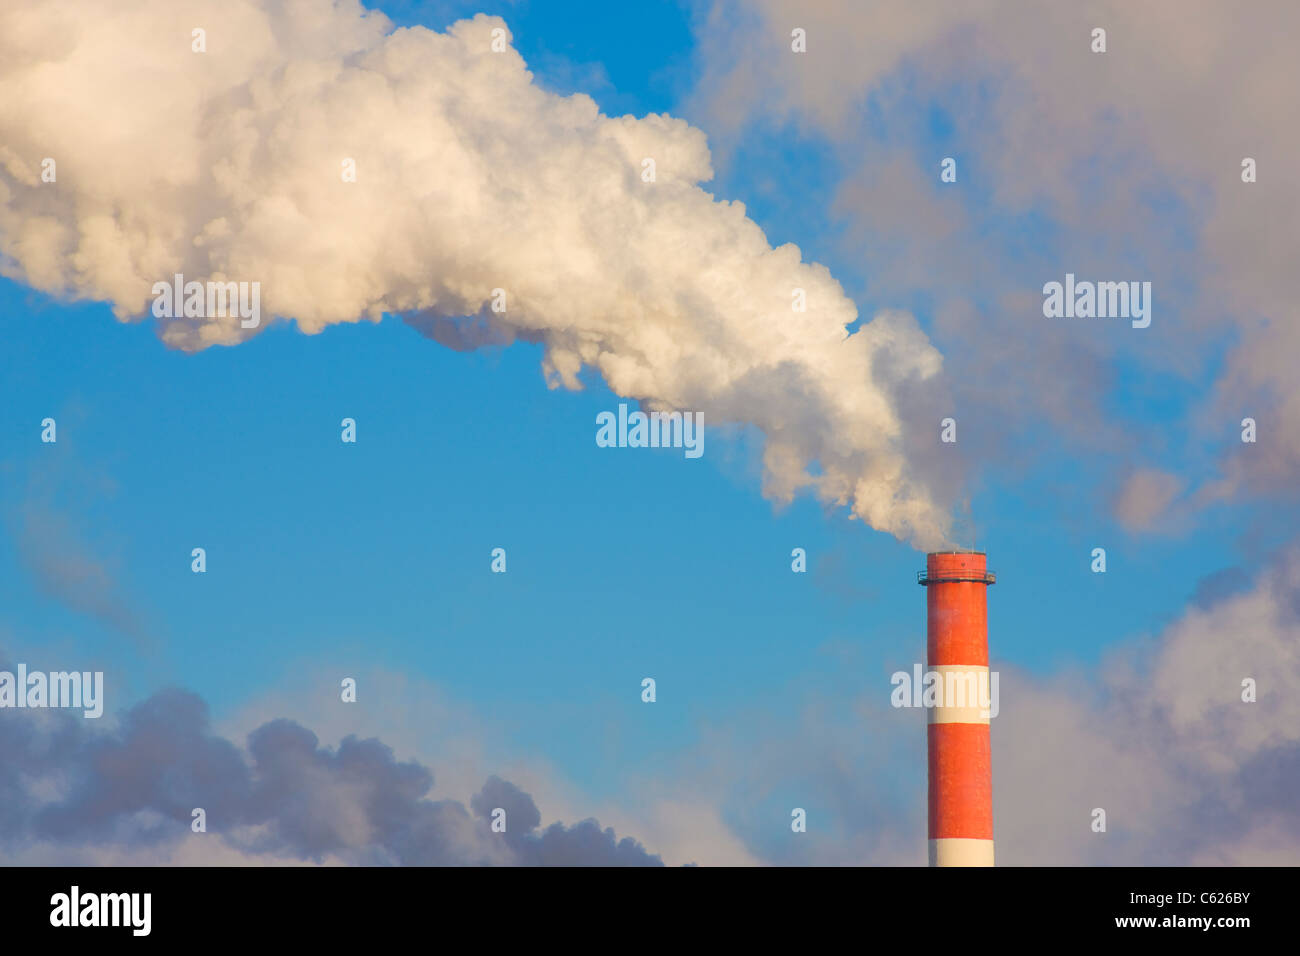 Smokestack in an oil refinery Stock Photo